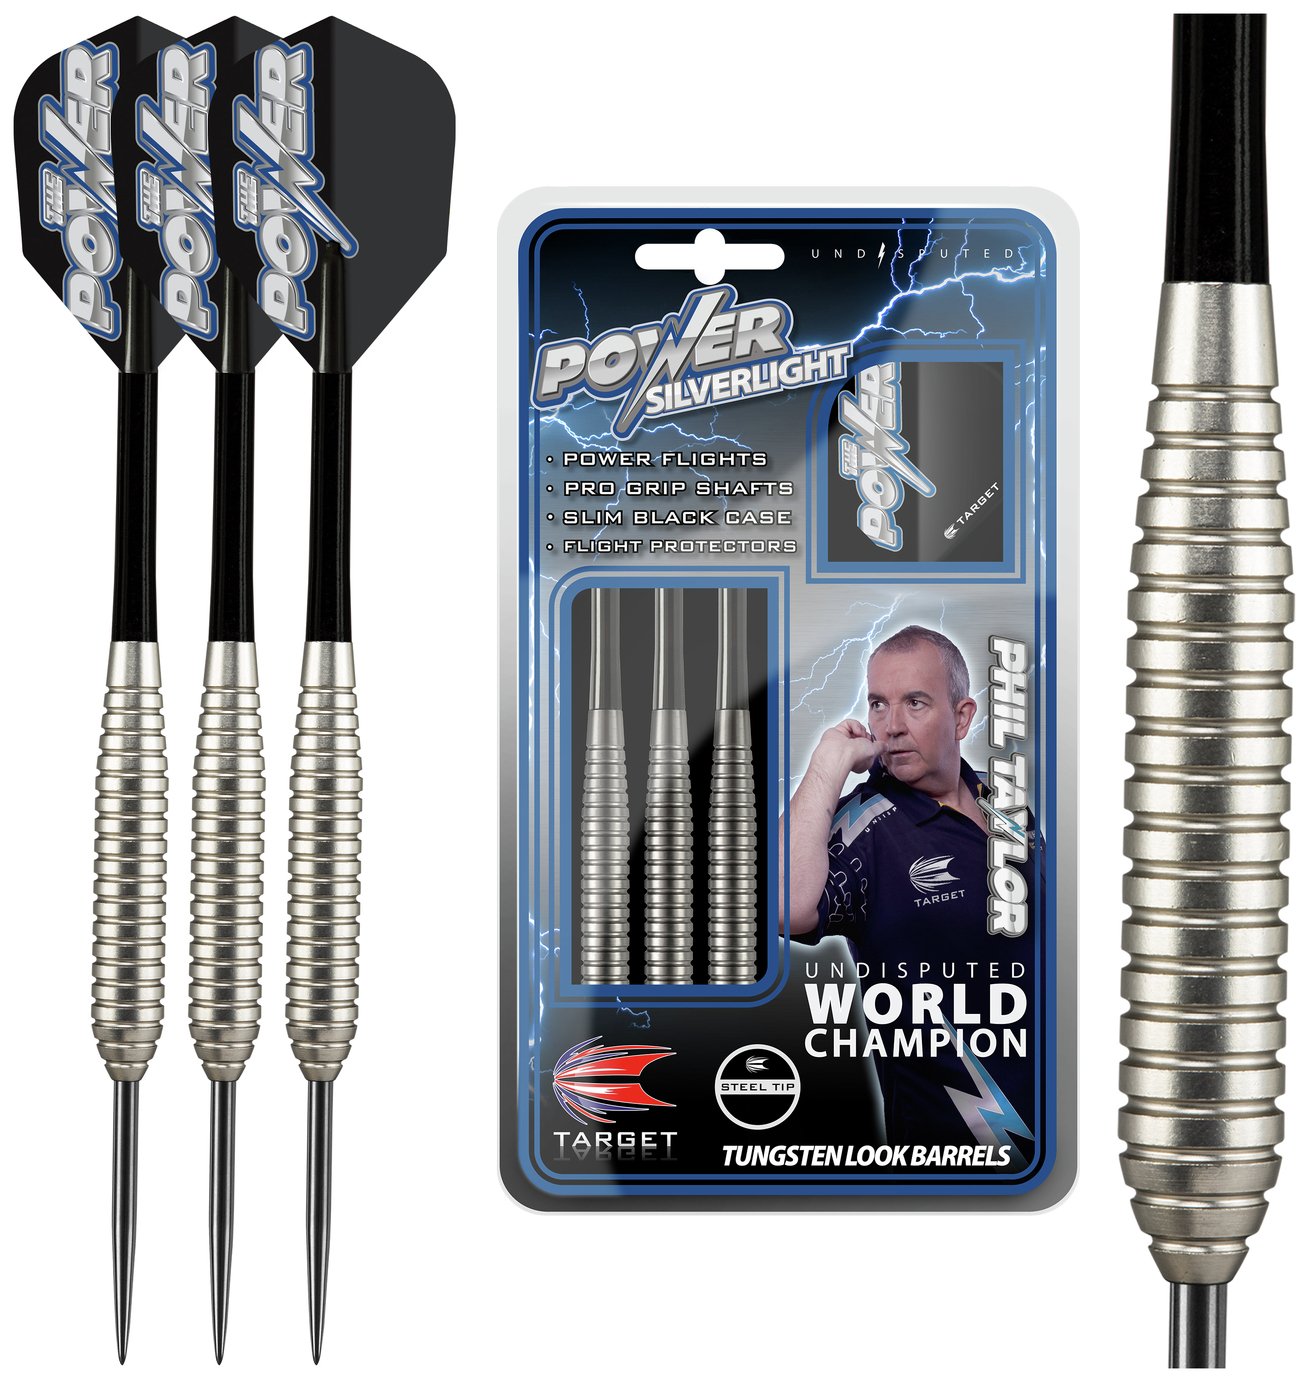 Phil Taylor Silverlight 24g Tungsten-Look Darts. review